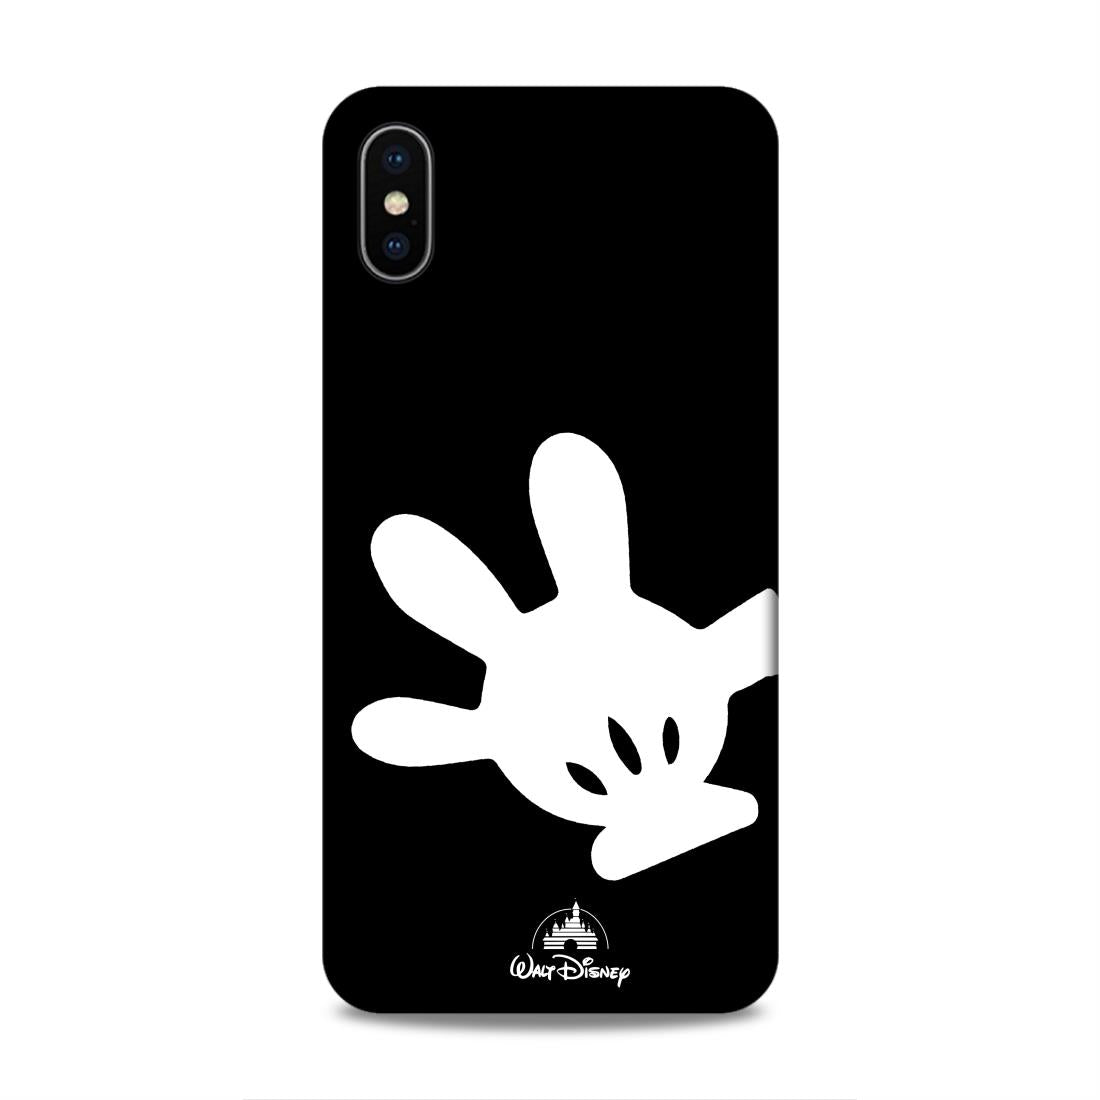 Micky Hand Hard Back Case For Apple iPhone XS Max